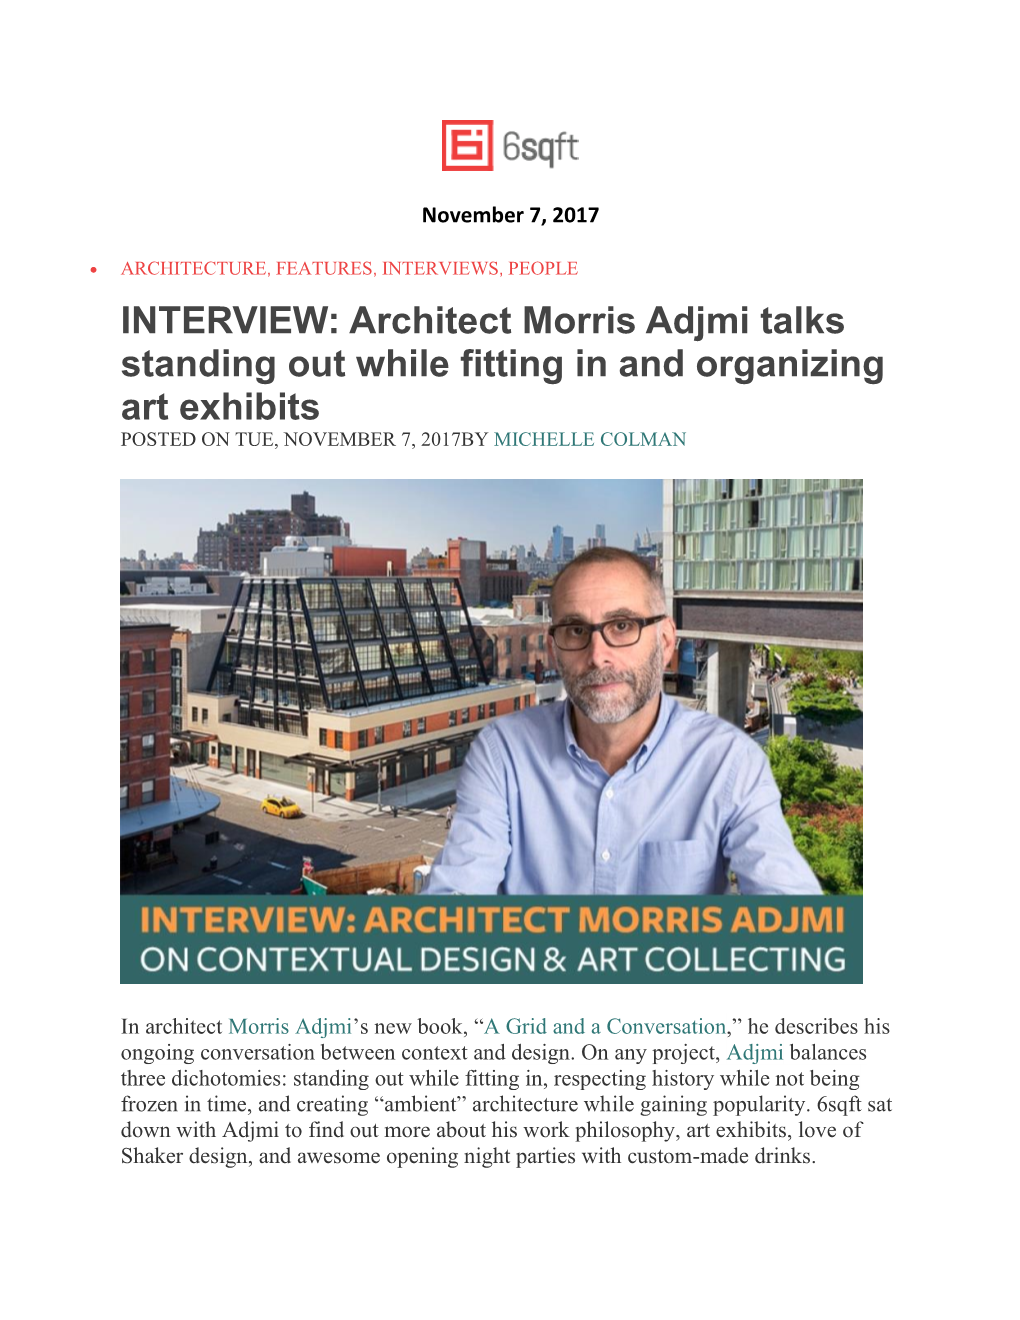 Architect Morris Adjmi Talks Standing out While Fitting in and Organizing Art Exhibits POSTED on TUE, NOVEMBER 7, 2017BY MICHELLE COLMAN